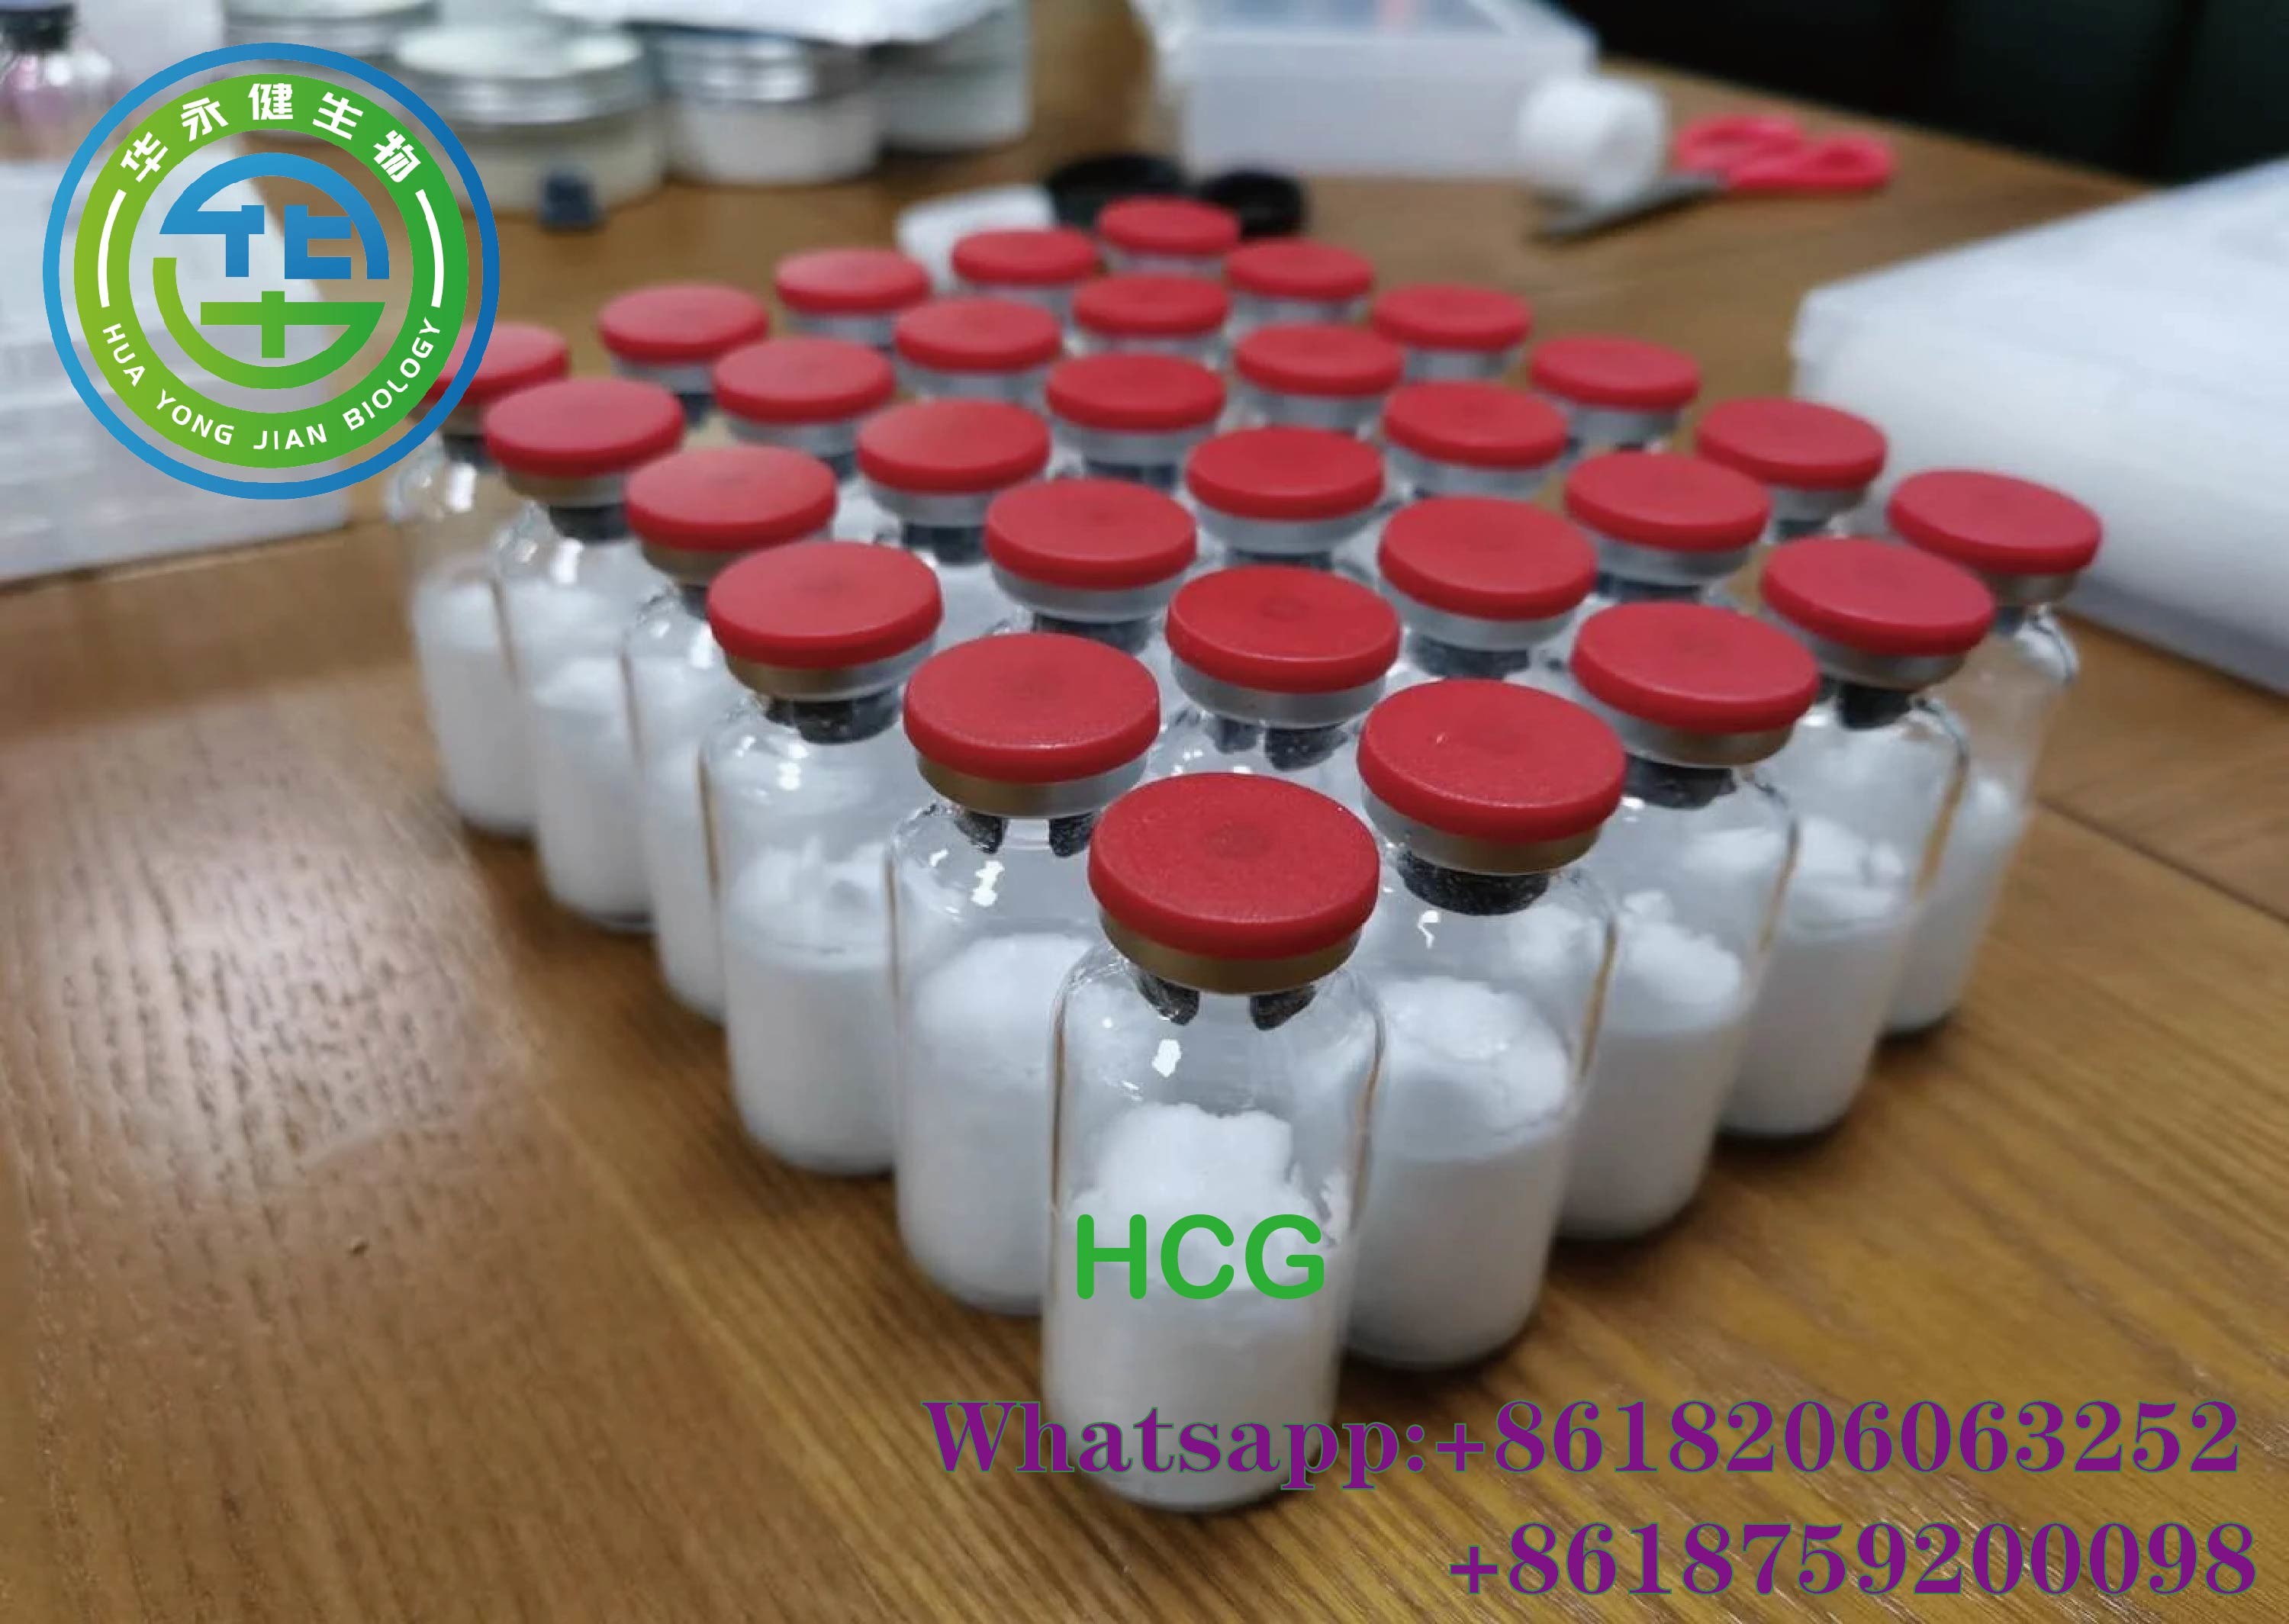 Wholesale chorionic gonadotropin Human Growth Hormone Peptide 5000 iu hcg injection Cas NR 9002-61-3 from china suppliers